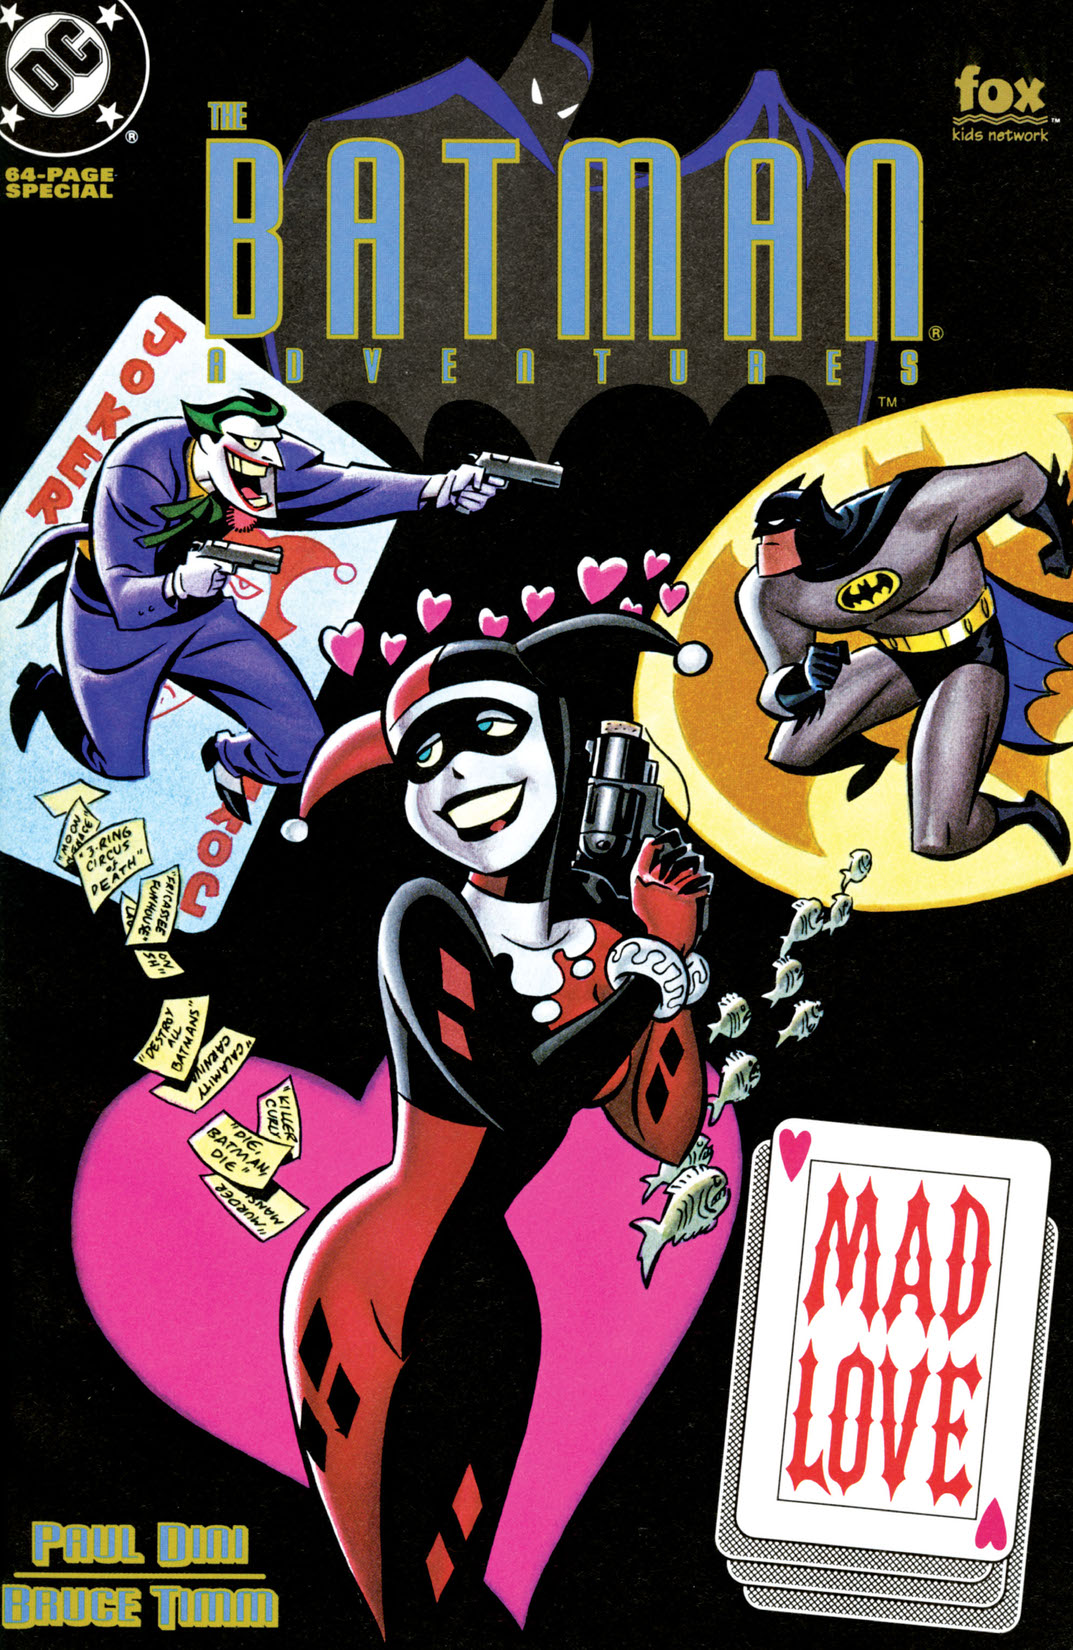 The Batman Adventures: Mad Love #1 preview images